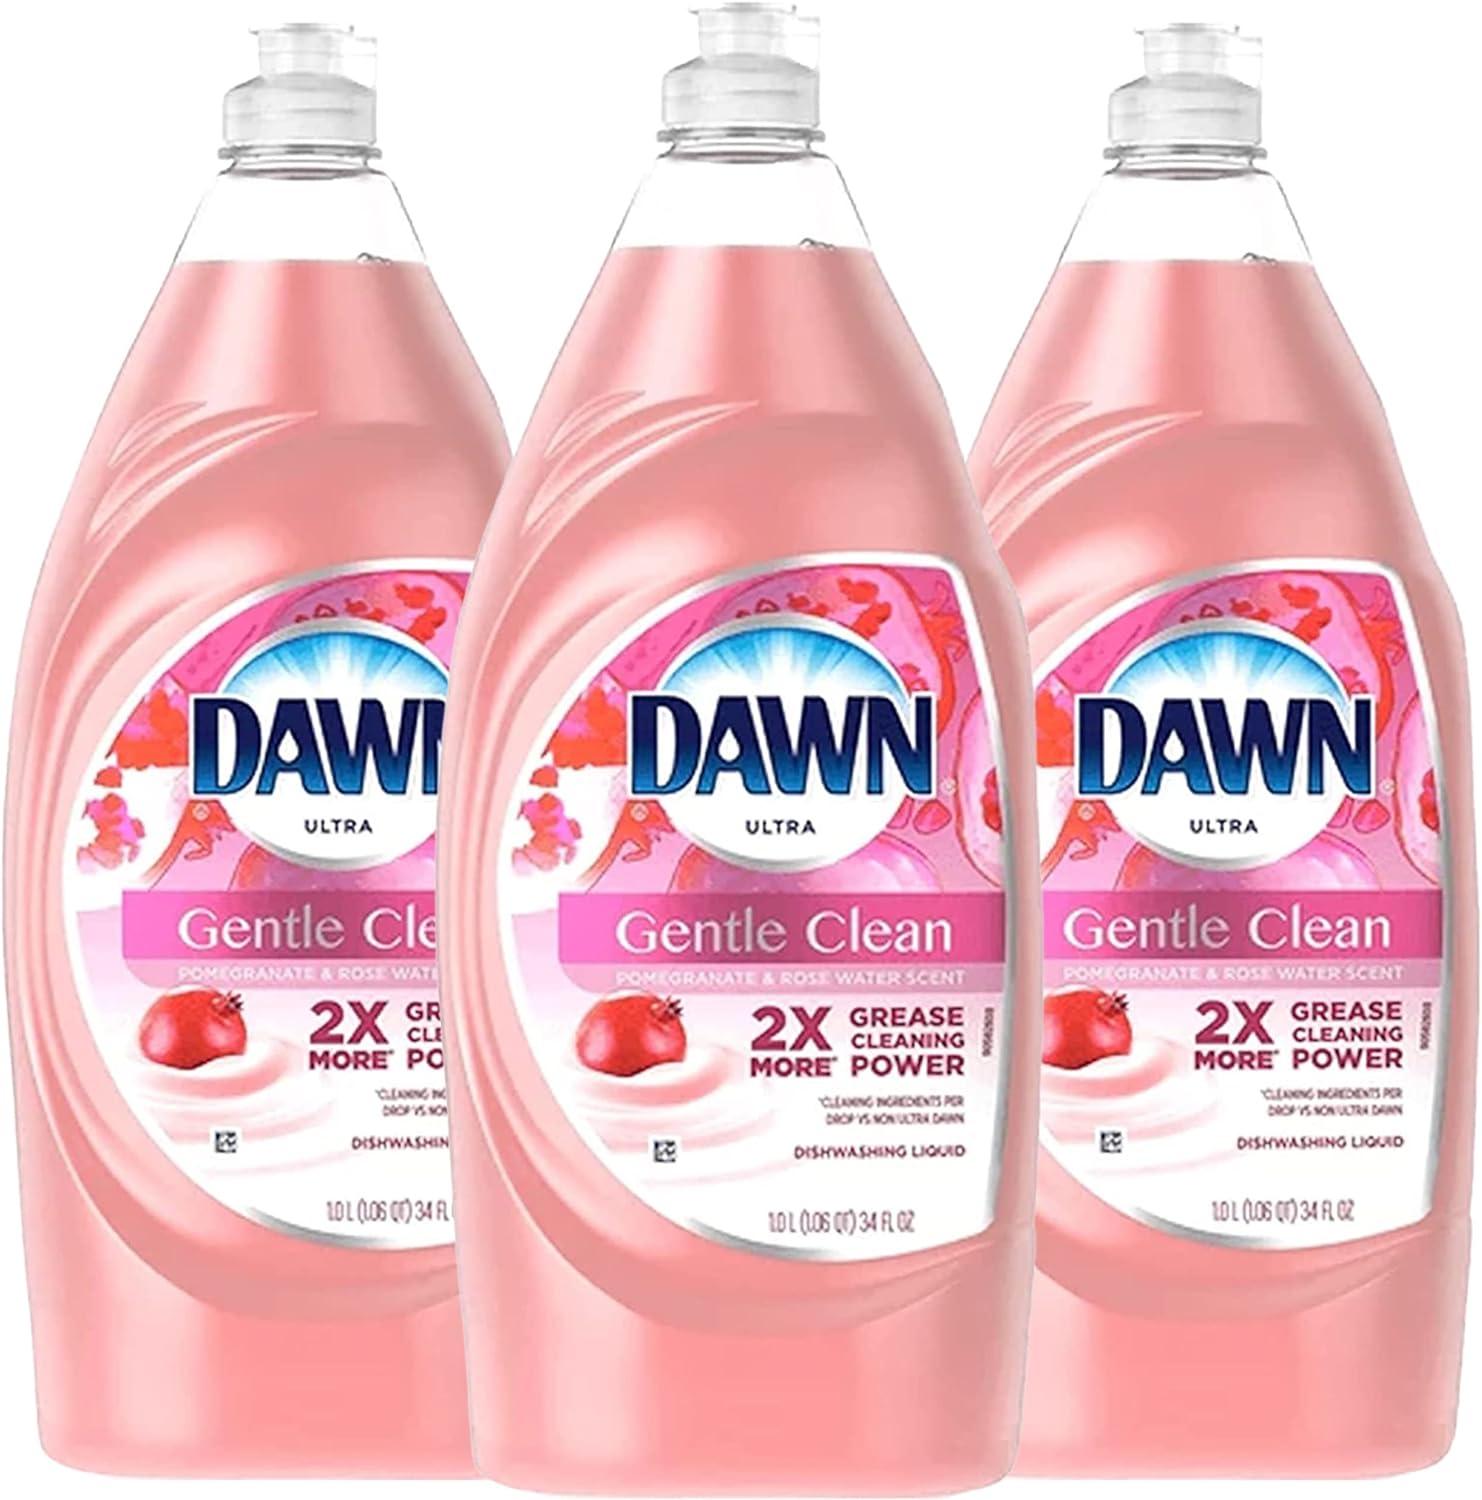 Dawn Ultra Gentle Clean Dishwashing Liquid Dish Soap, Pomegranate and Rose Water Scent, 34 Fl Oz (Pack of 3)